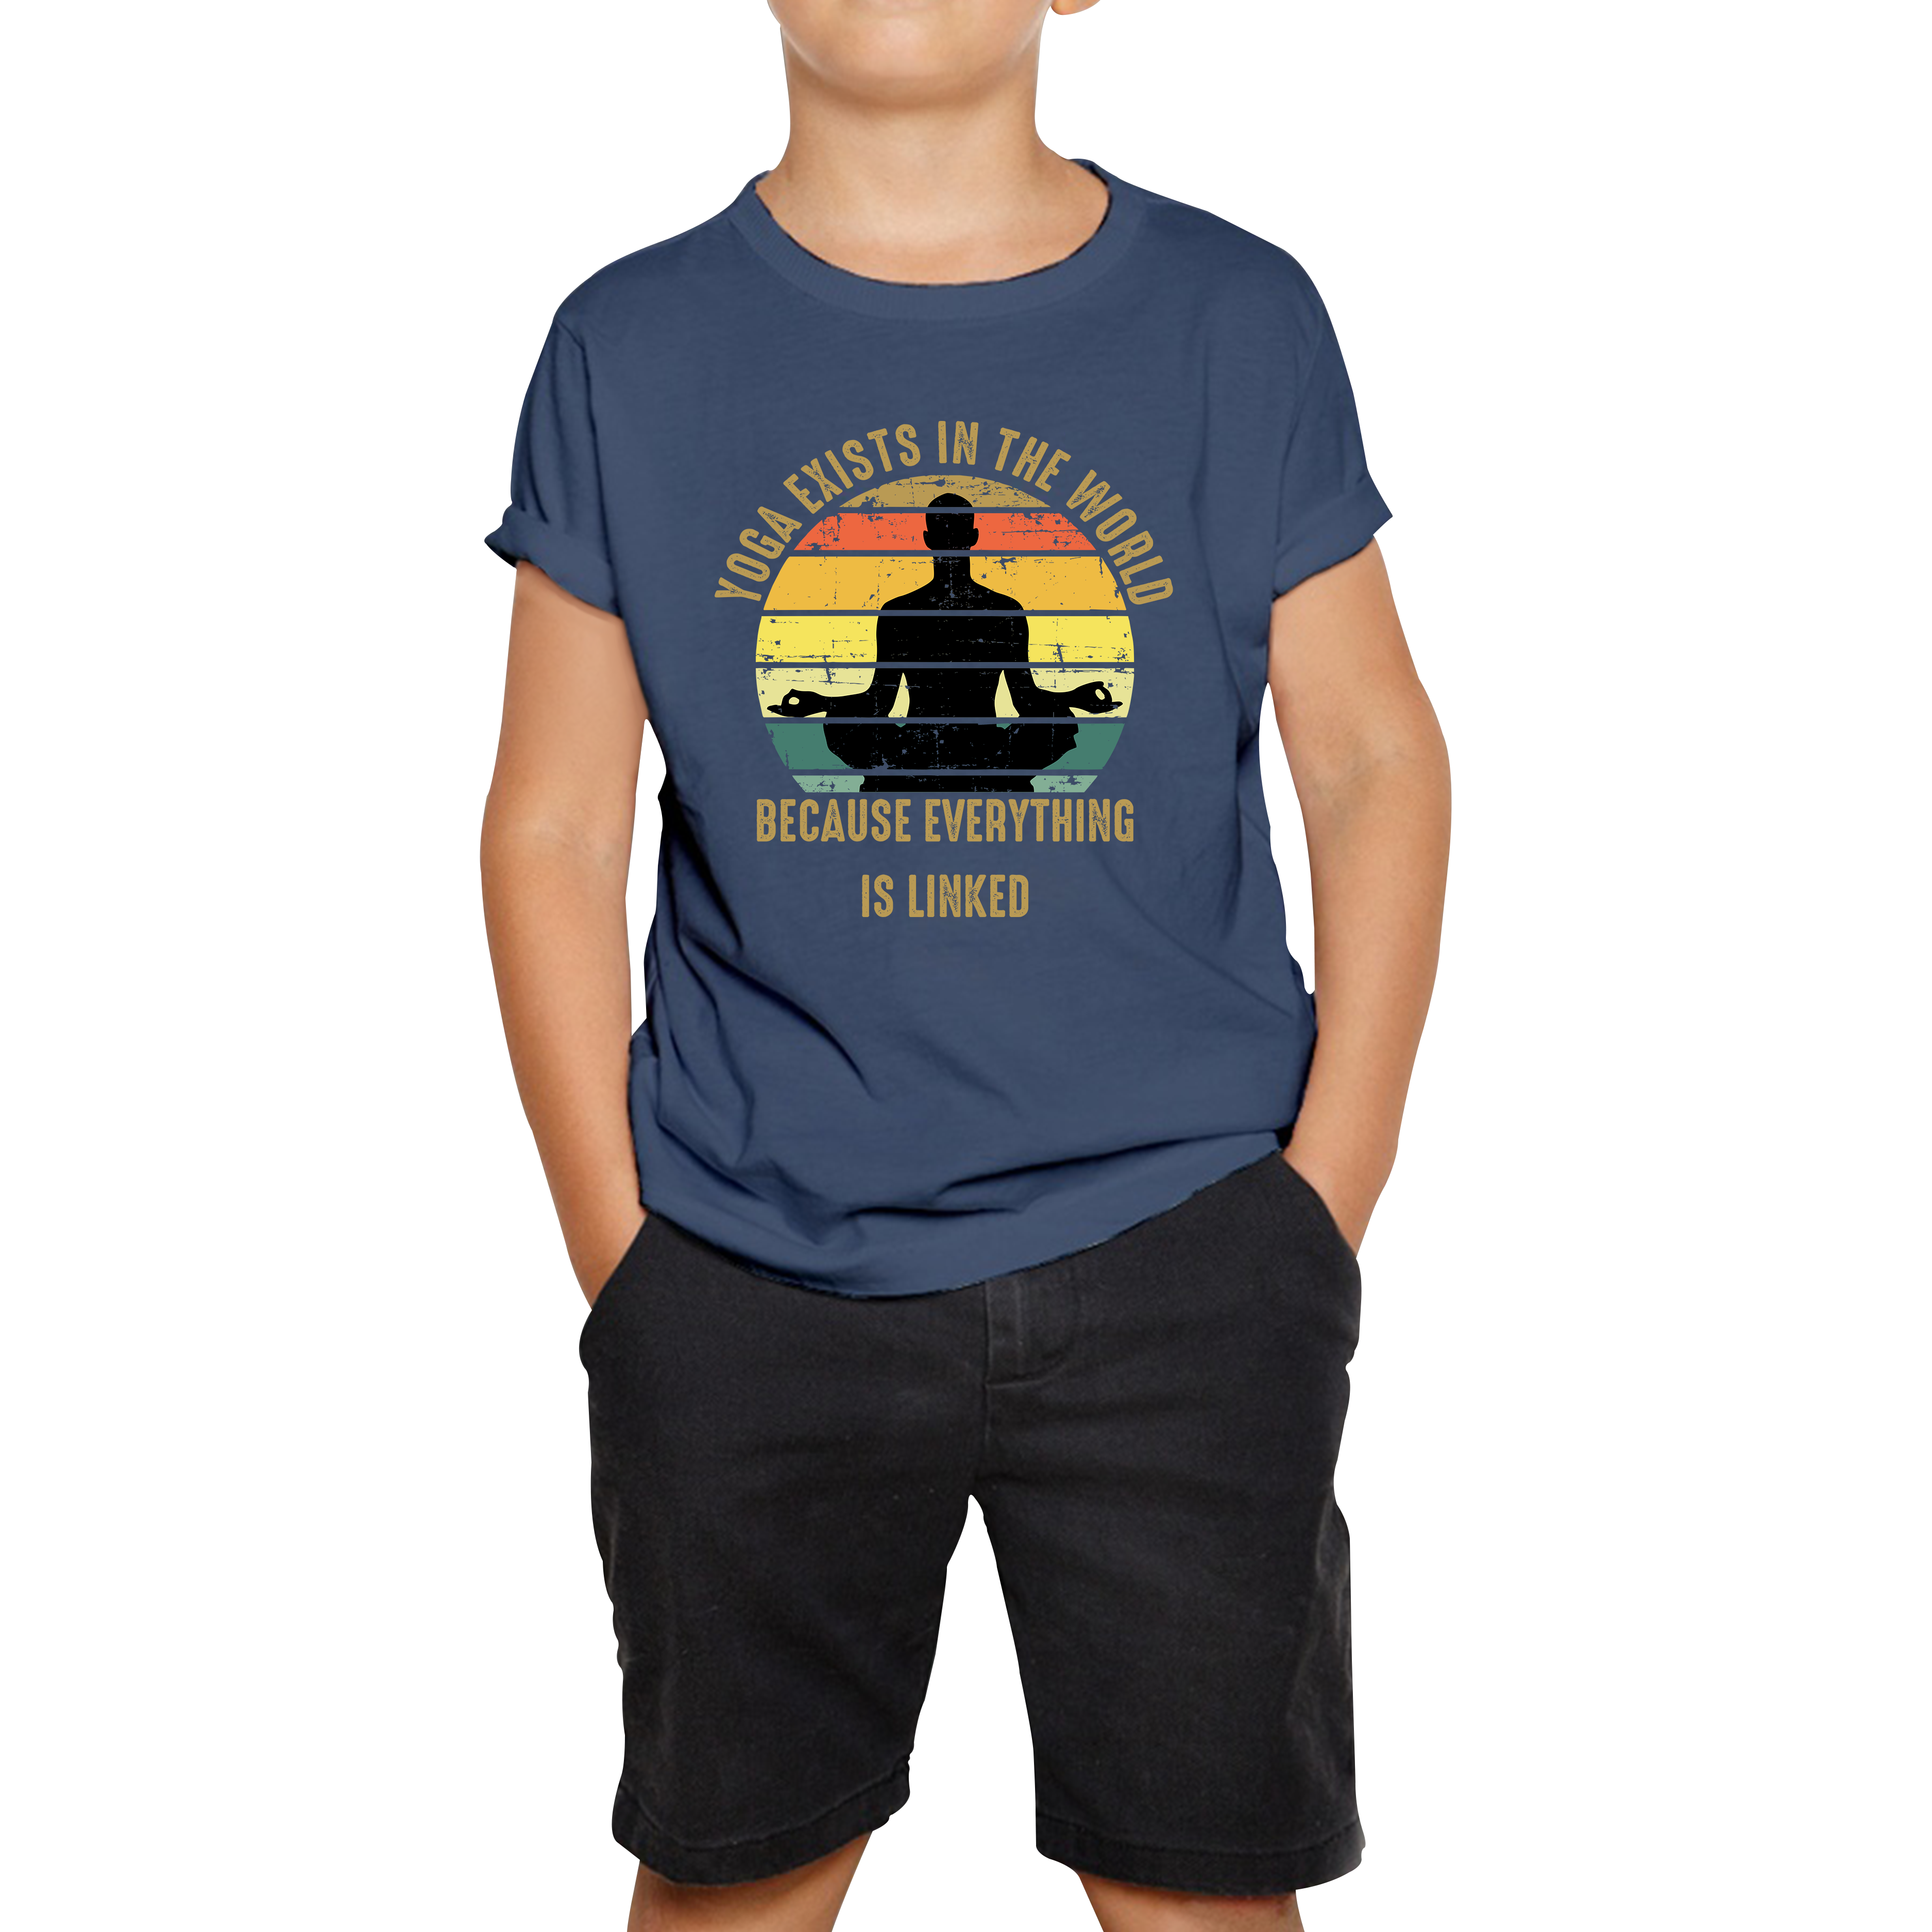 Yoga Exist In The World Because Everything Is Linked Vintage Exercise Lovers Kids Tee